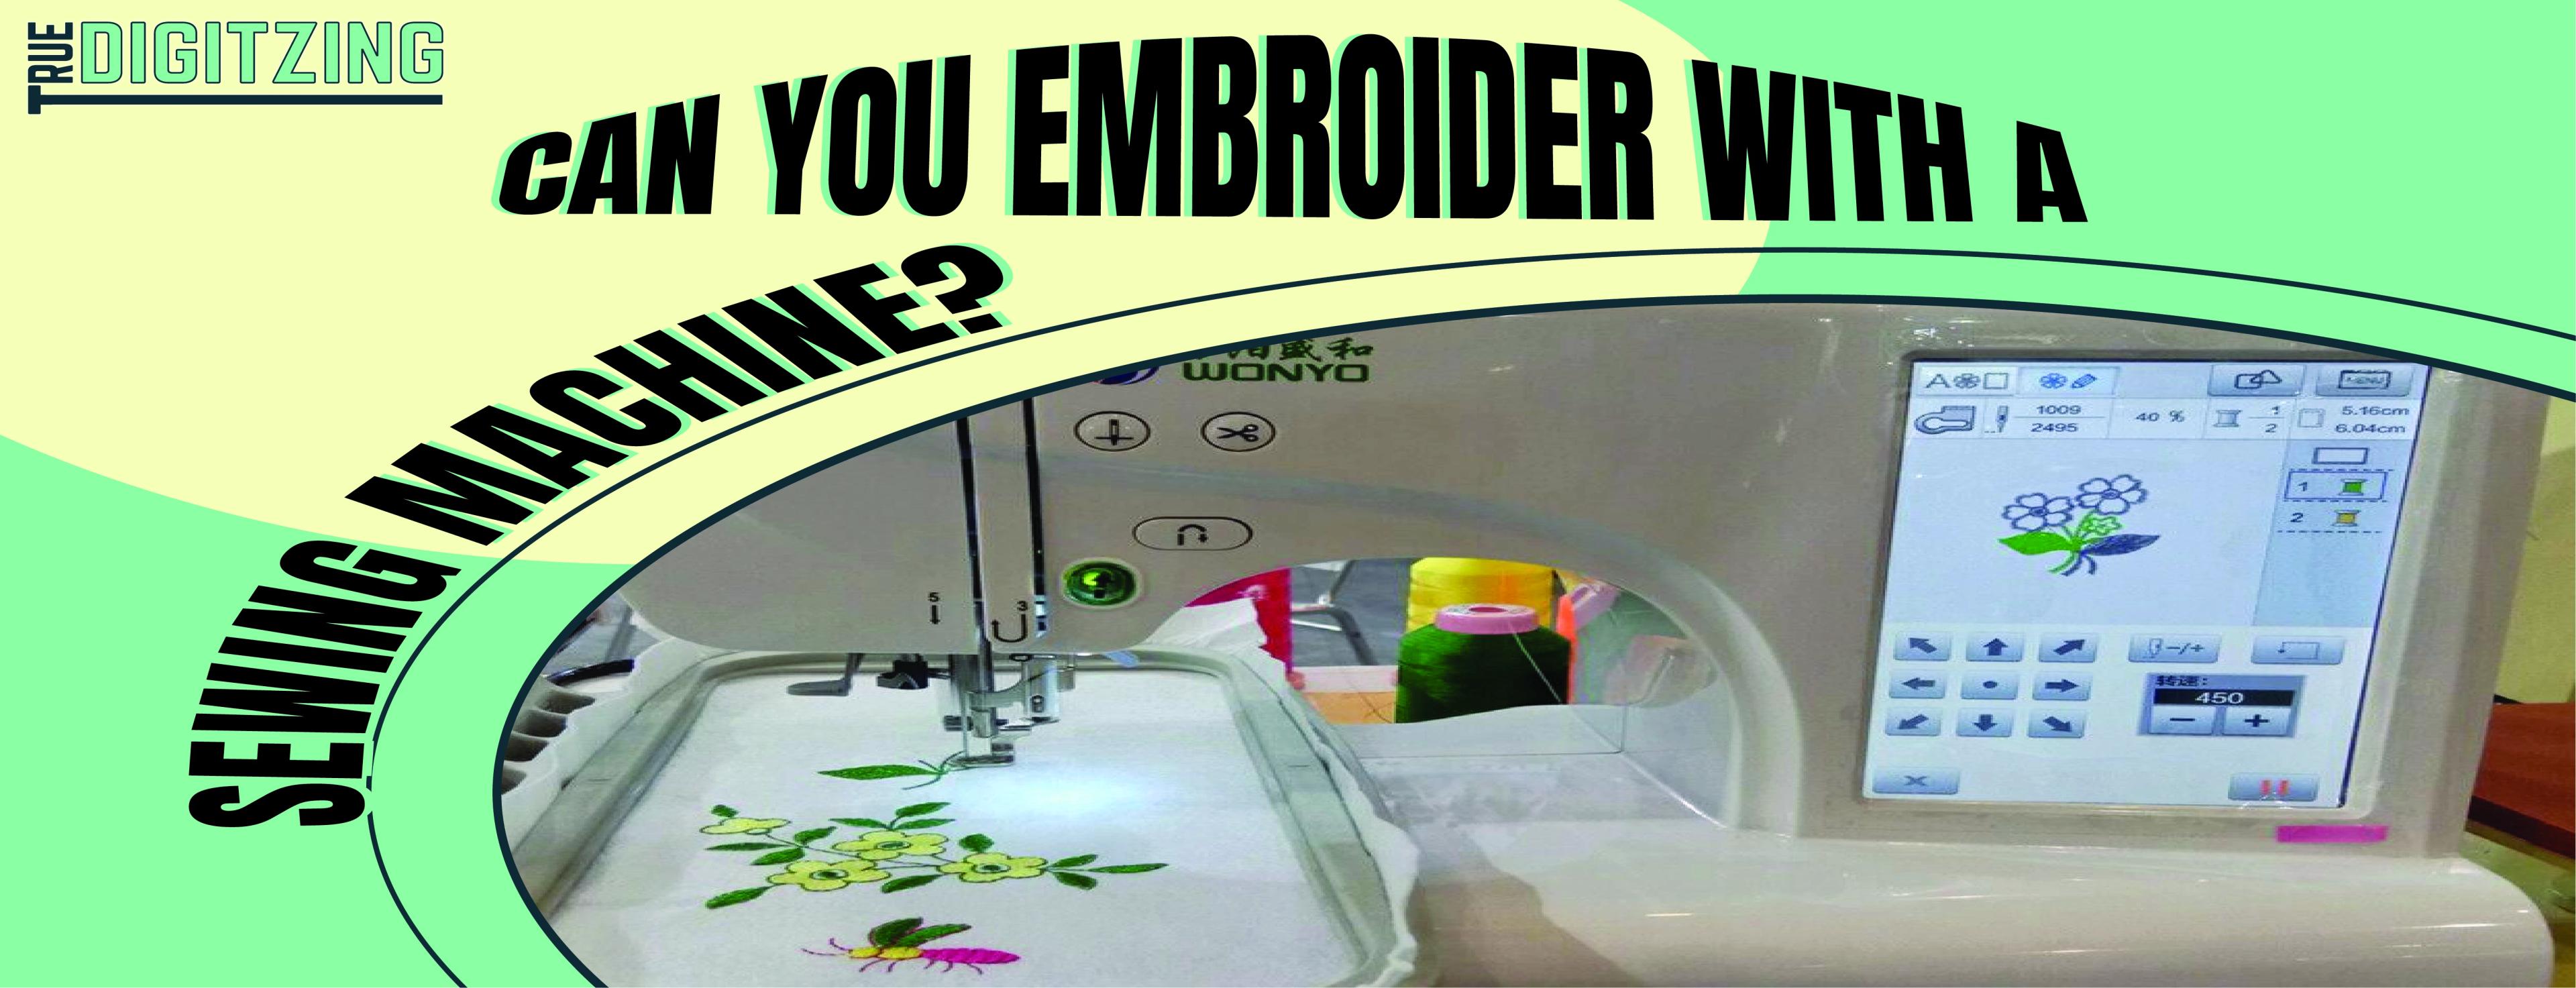 Embroider with a Sewing Machine